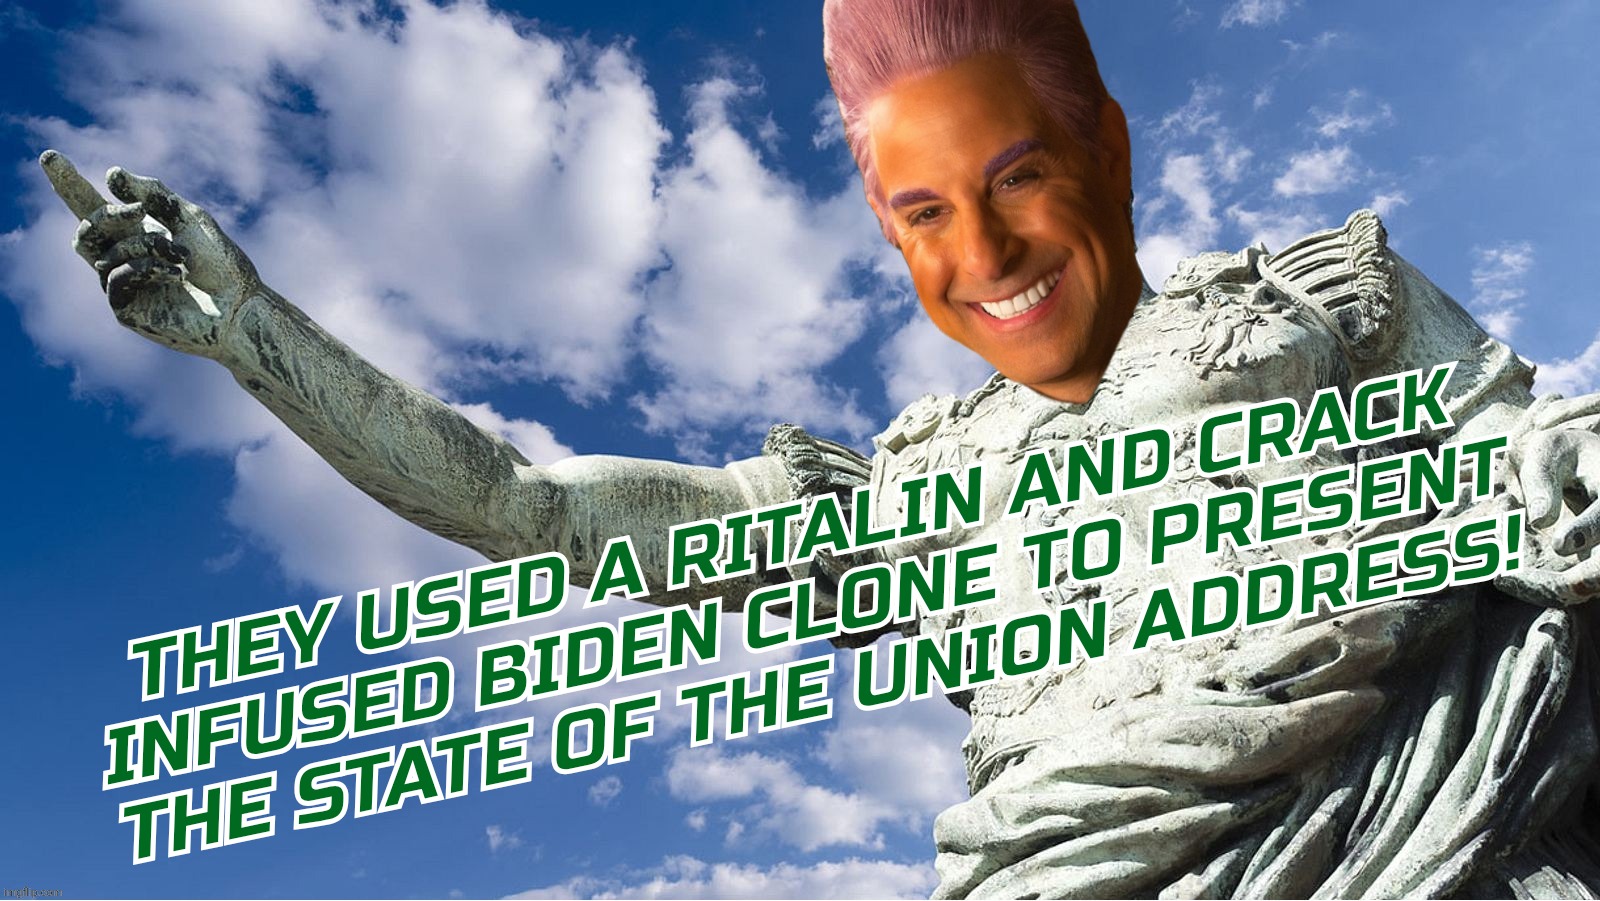 Caesar Flickerman | THEY USED A RITALIN AND CRACK
INFUSED BIDEN CLONE TO PRESENT
THE STATE OF THE UNION ADDRESS! | image tagged in caesar flickerman | made w/ Imgflip meme maker